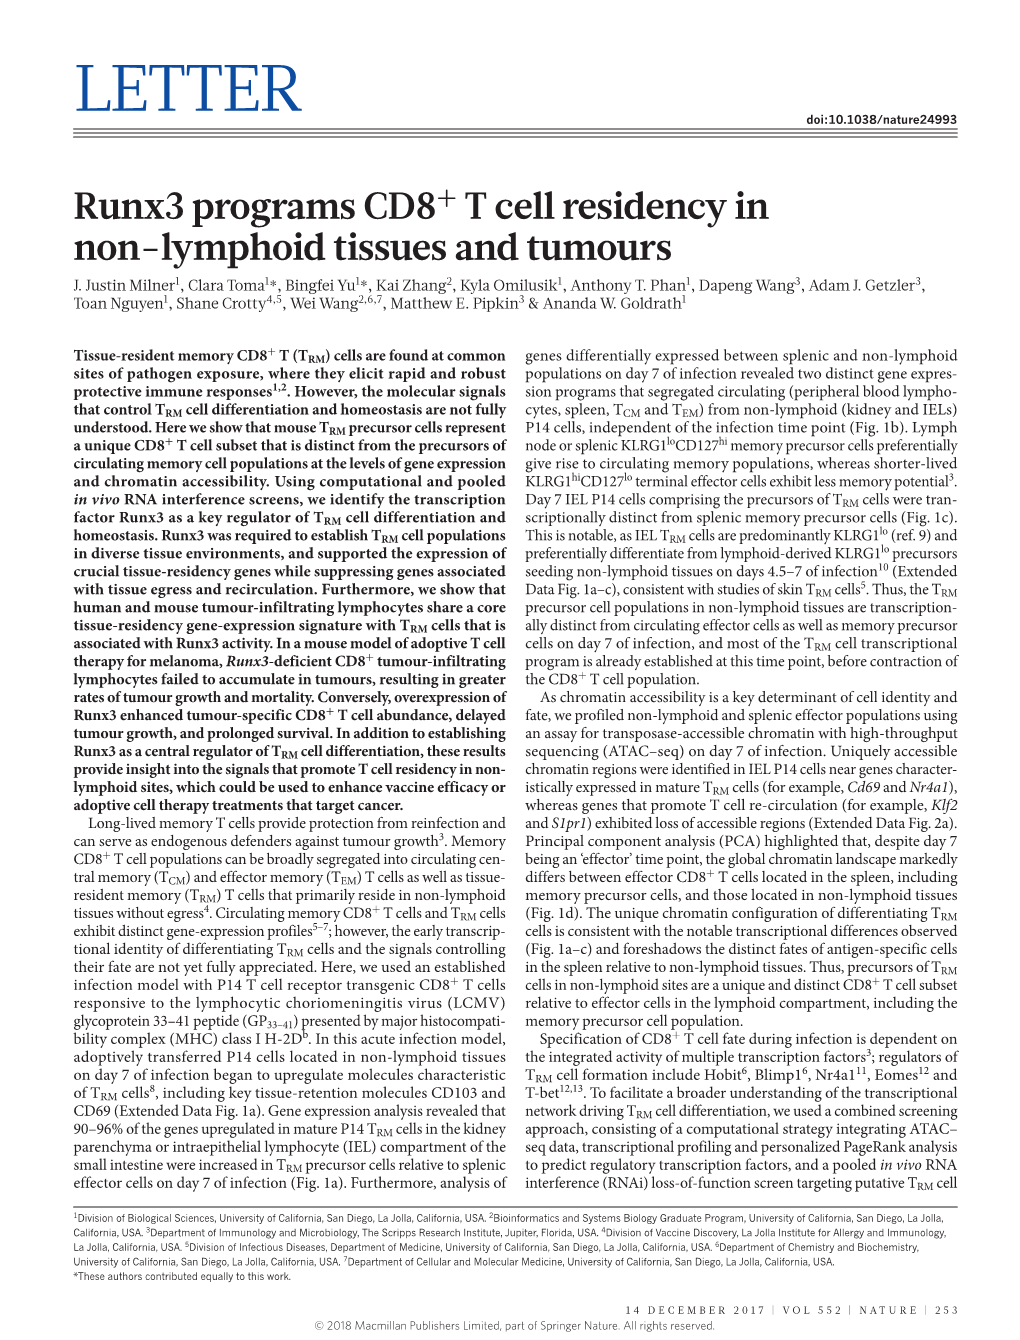 Runx3 Programs CD8+ T Cell Residency in Non-Lymphoid Tissues and Tumours J